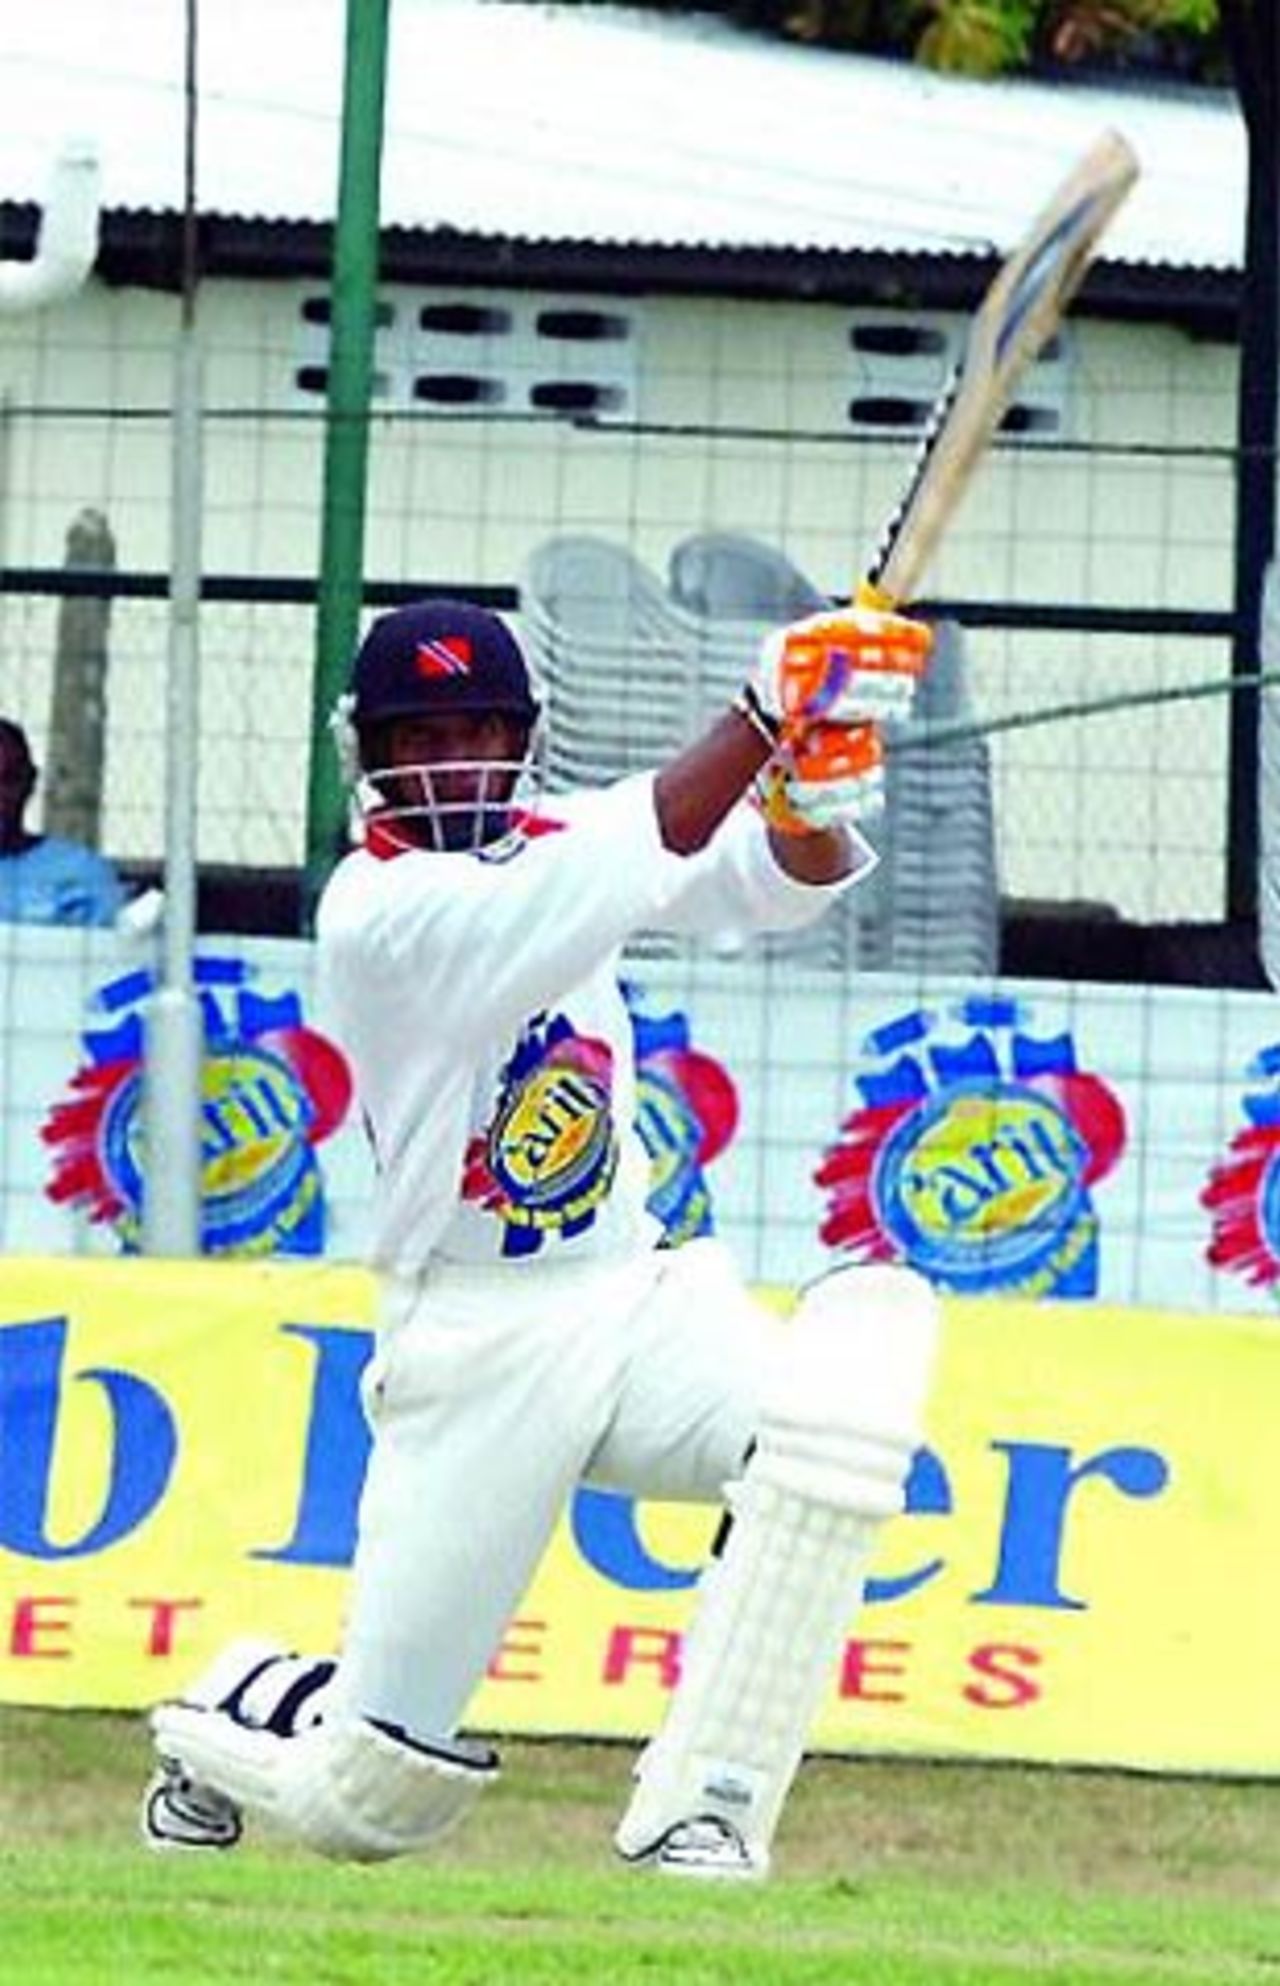 William Perkins drives during his 41, Trinidad & Tobago v Barbados, Carib Beer Series, 7th round, 1st day, Port of Spain, March 28, 2008